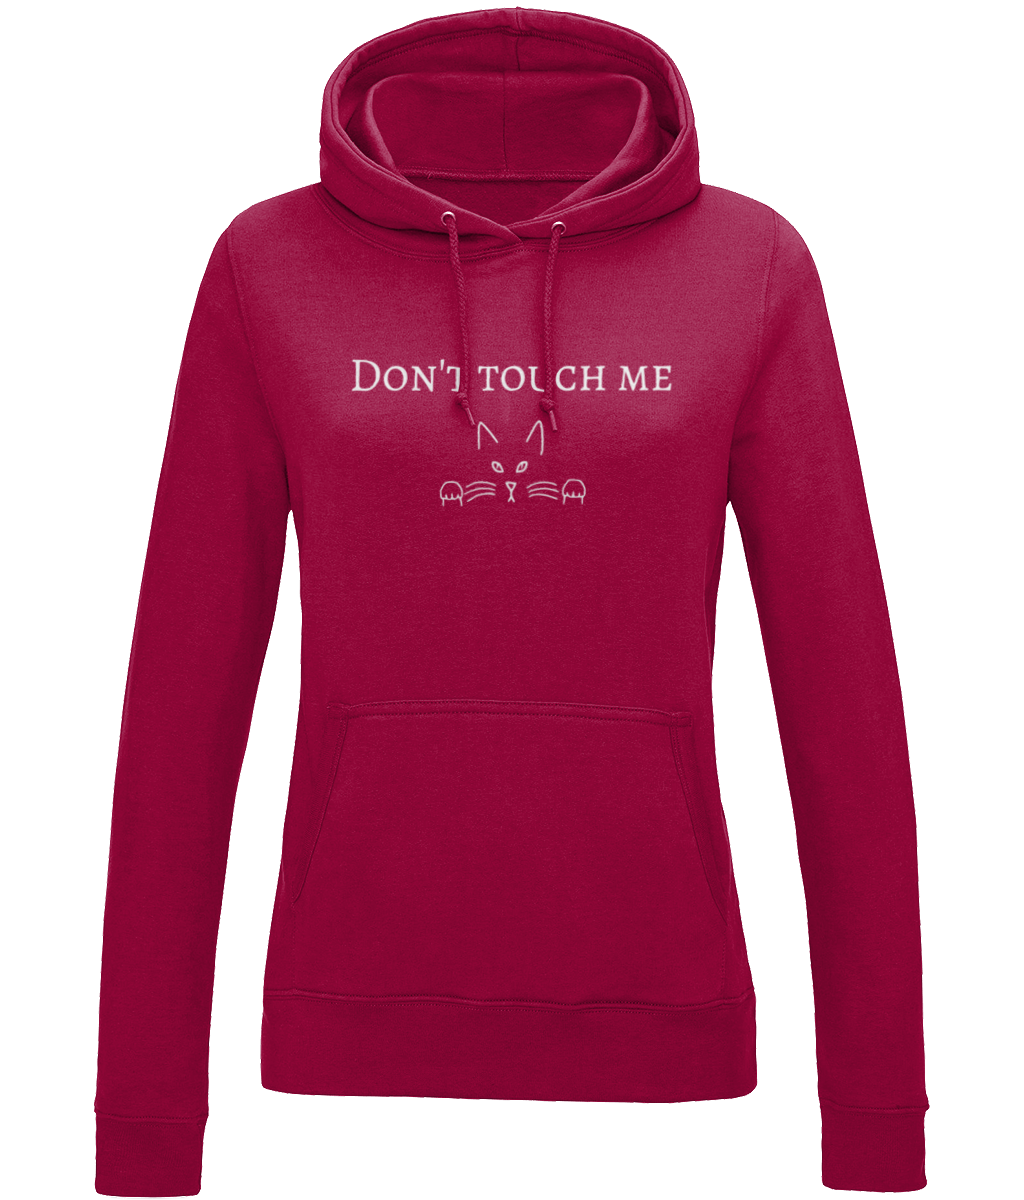 'Don't touch me' Hoodie - squishbeans